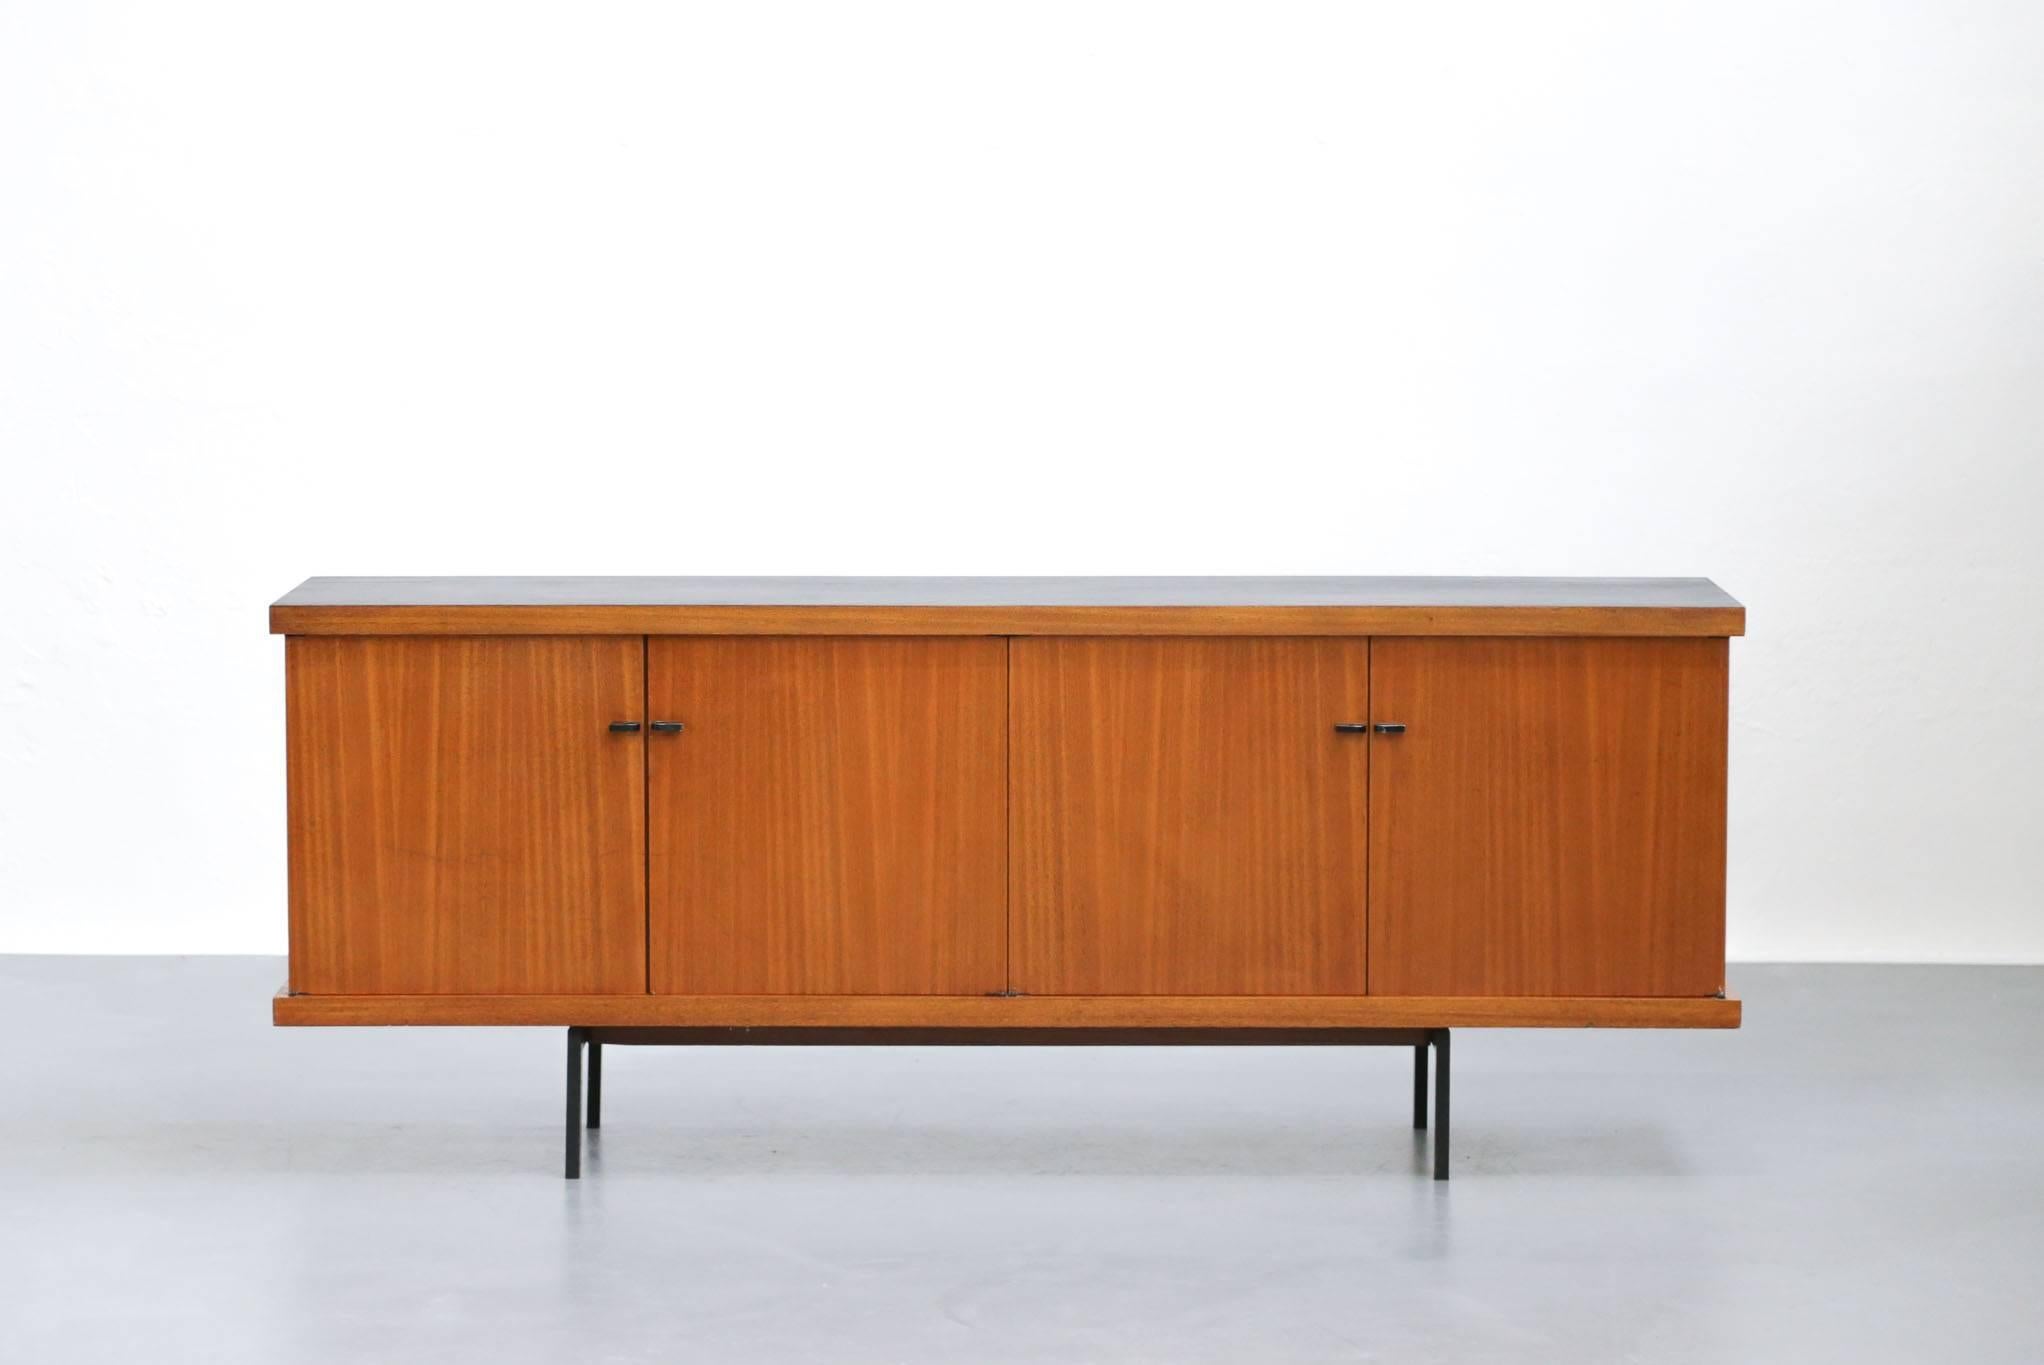 Nice sideboard in the style of French designer Alain Richard.